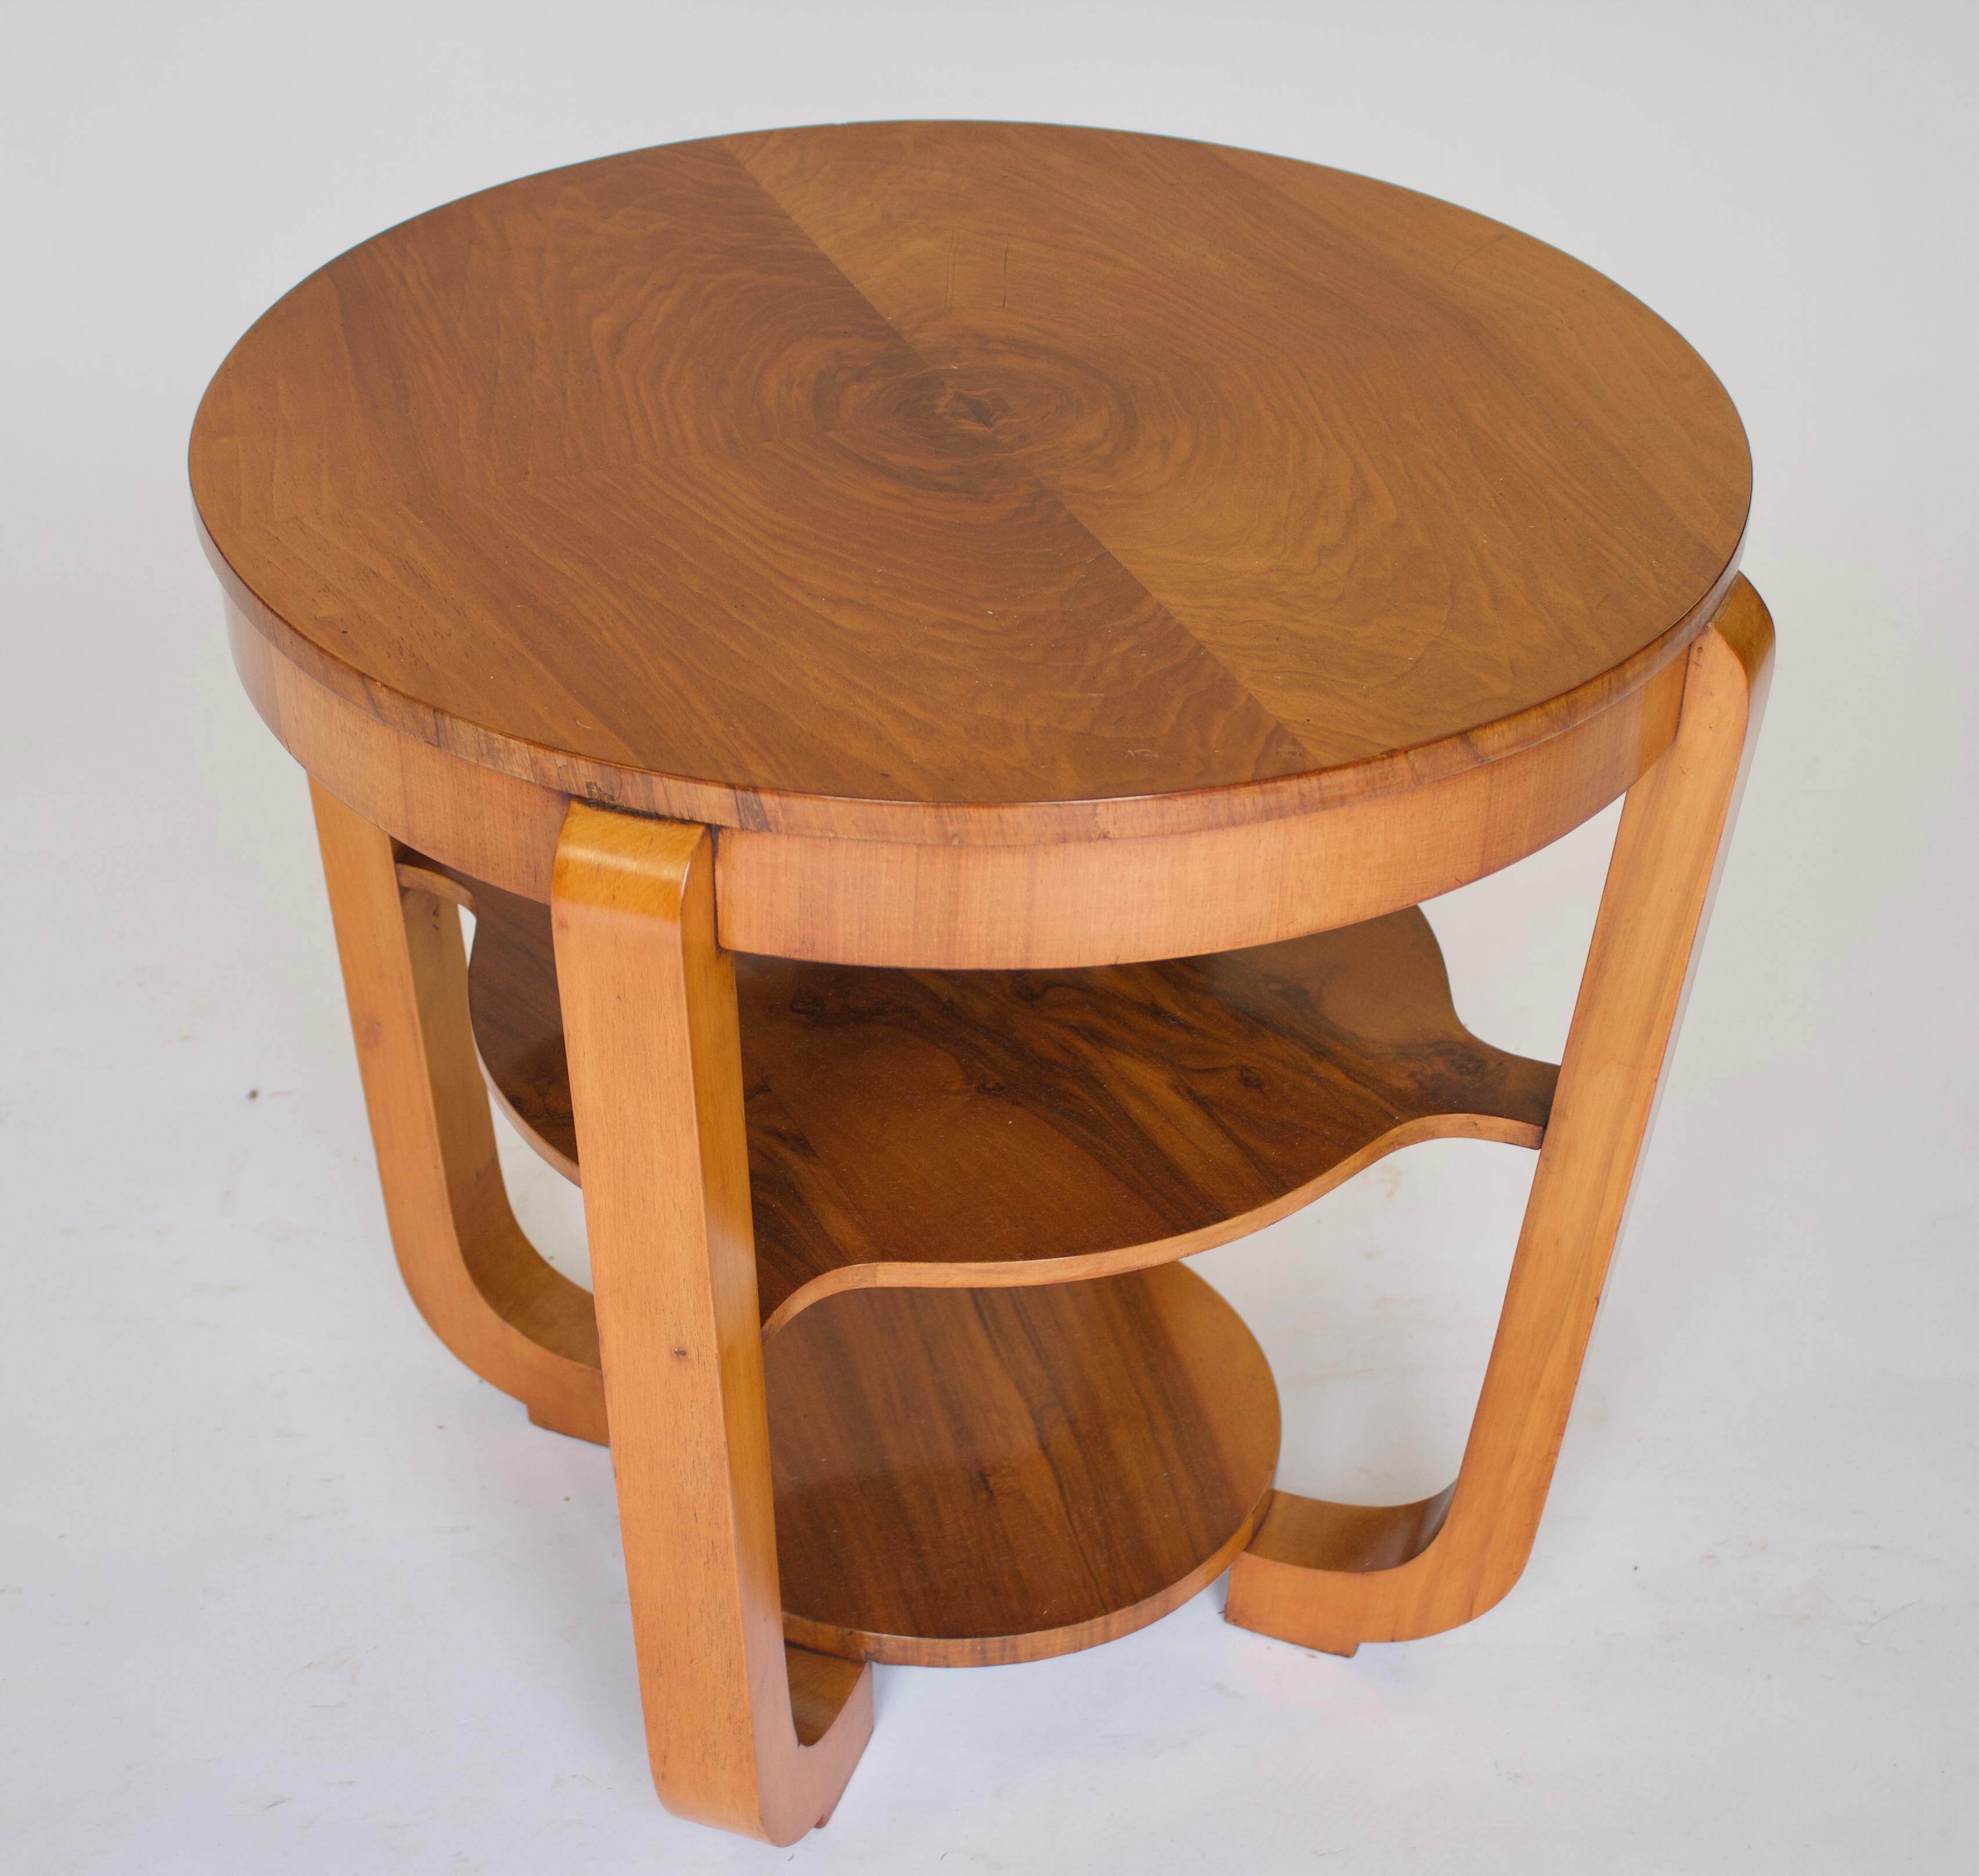 Art Deco Walnut 3 Tier Table circa 1930s
Circular top with walnut quarter veneer, 58cm diameter
both undertiers with walnut veneer, 
supported by 4 shaped square legs curved at base
Recently Polished
